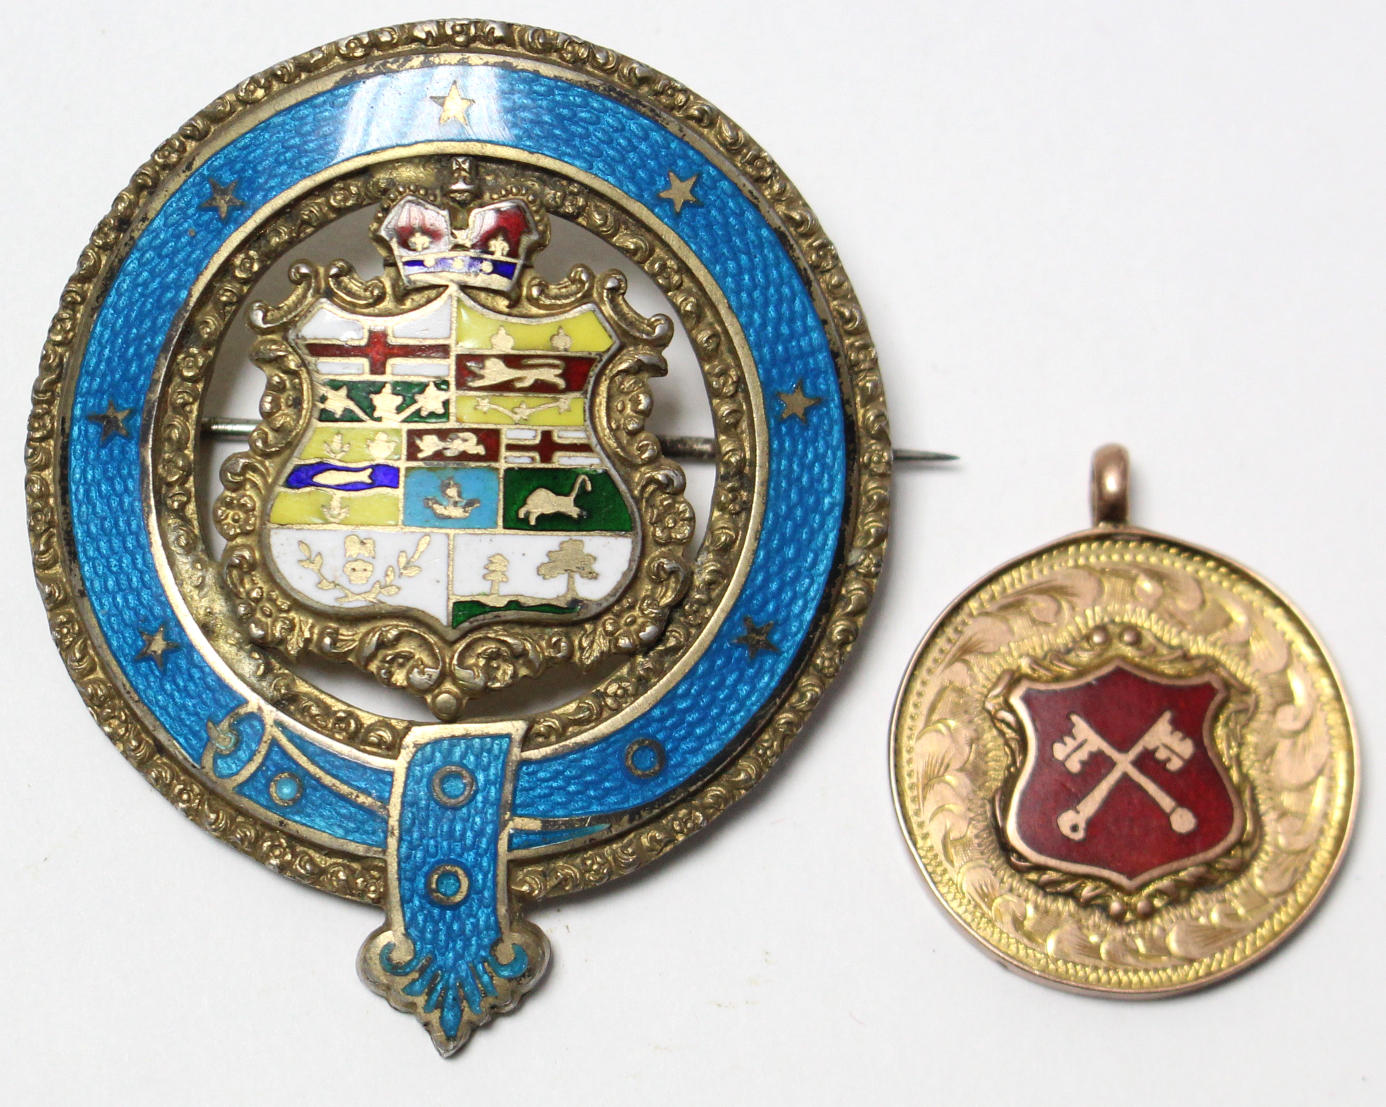 A 1920’s 9ct gold enamelled model awarded to “P.C.L. J. COULSON DIV 2, 1928”; & a sterling silver